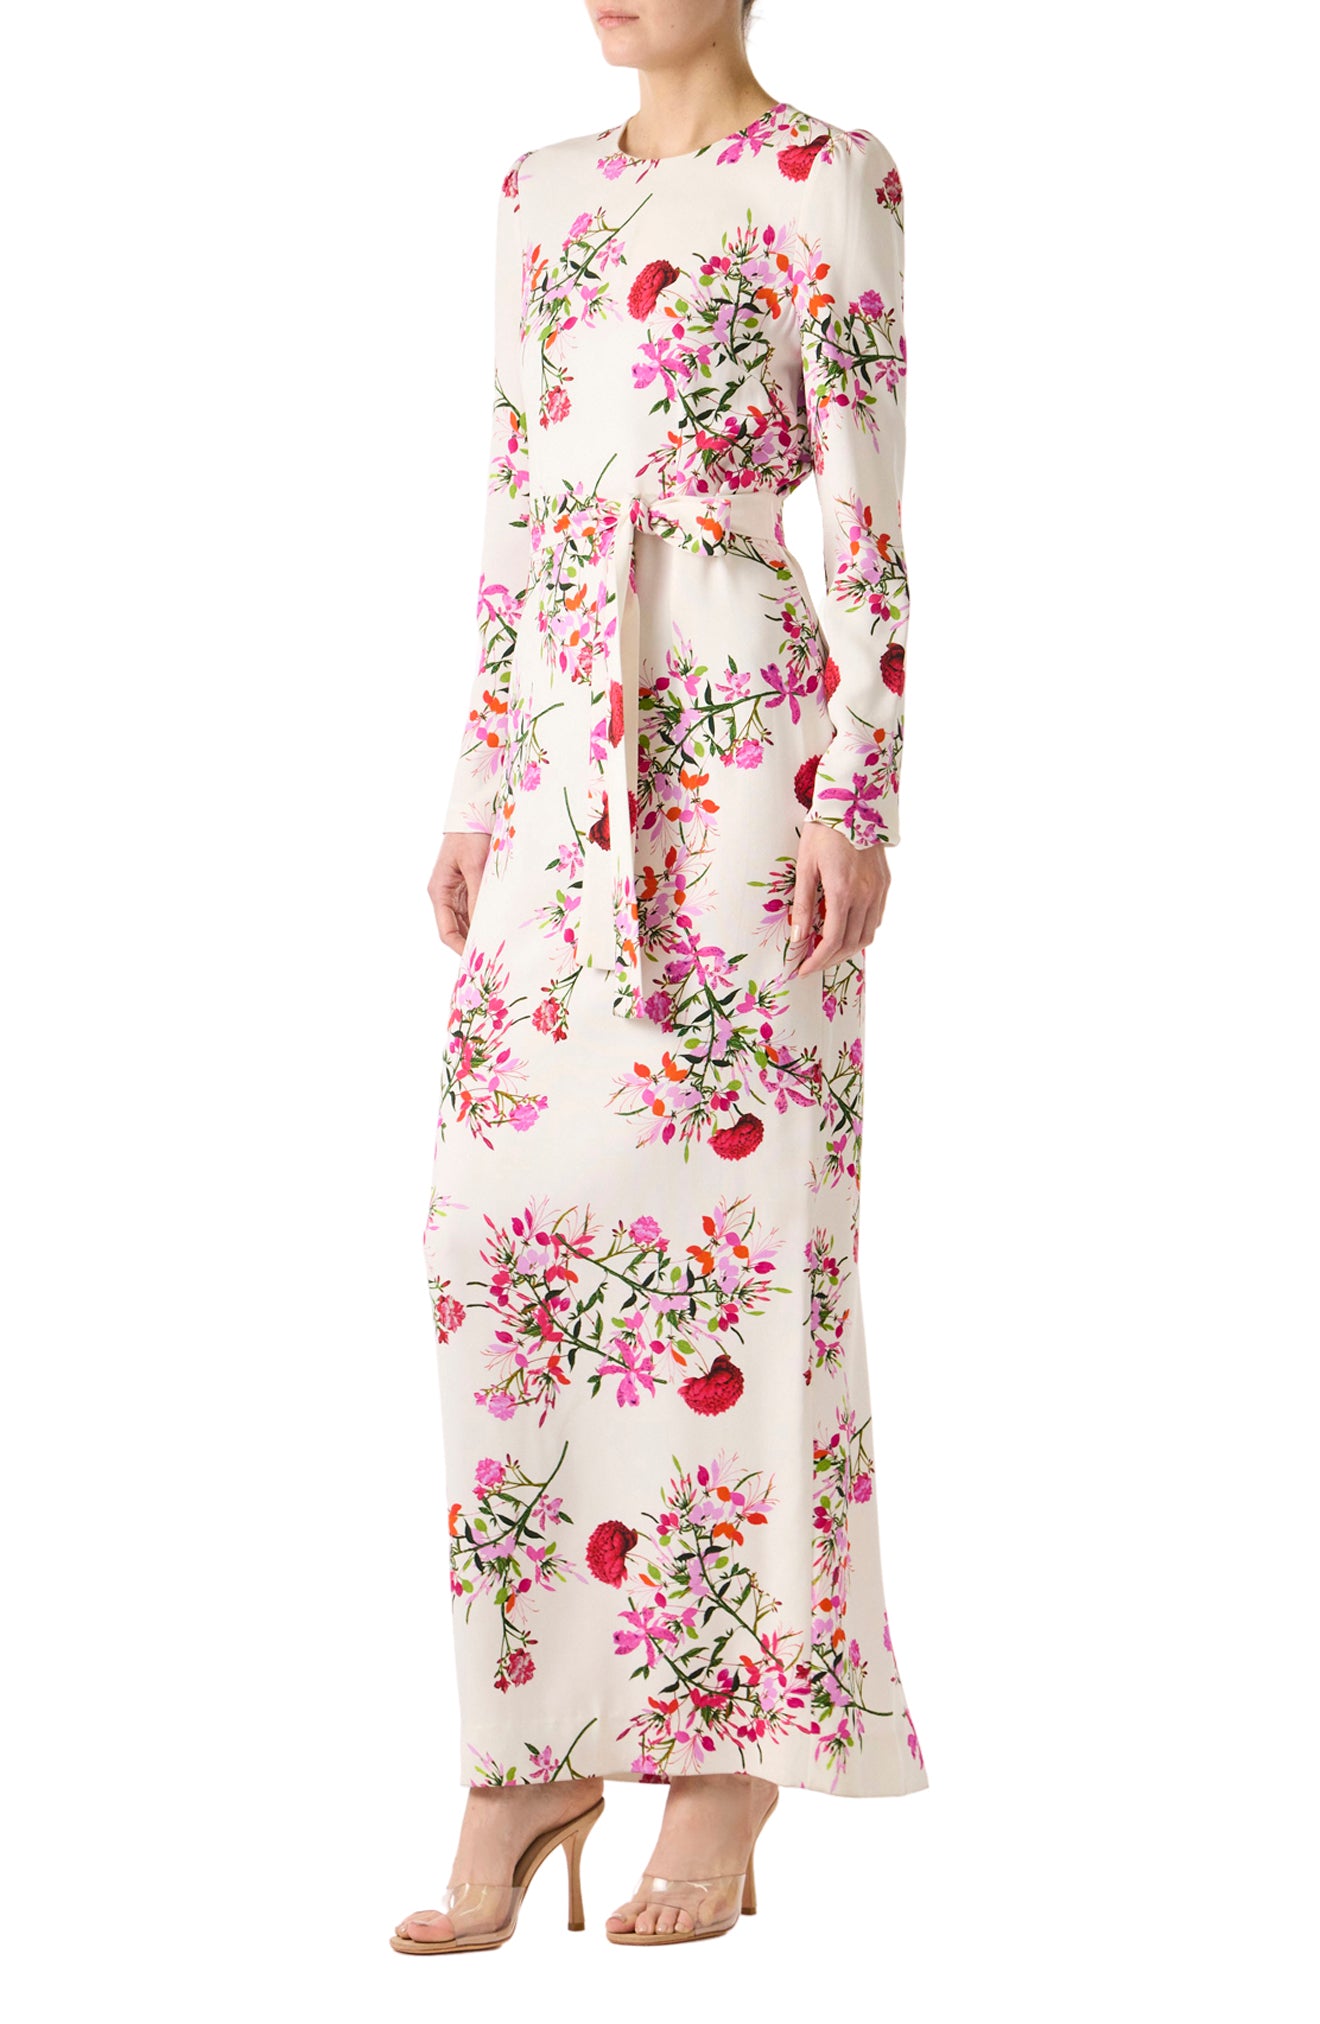 Monique Lhuillier Jewel Neck Long Sleeve Gown in fuchsia and silk white floral print with Belt